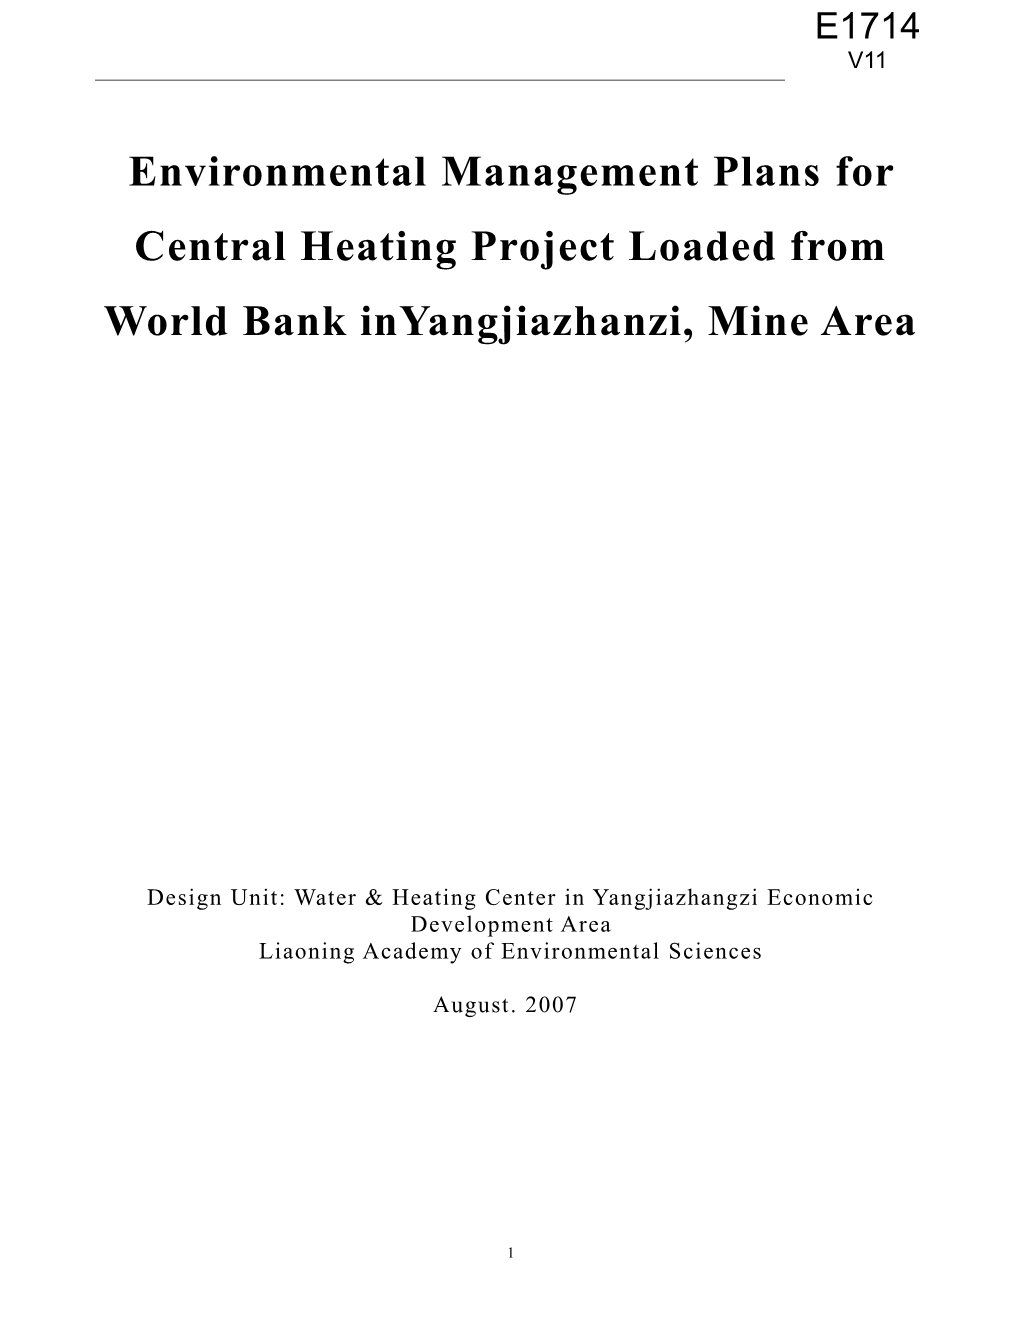 Environmental Management Plansfor Central Heating Project Loaded from World Bank